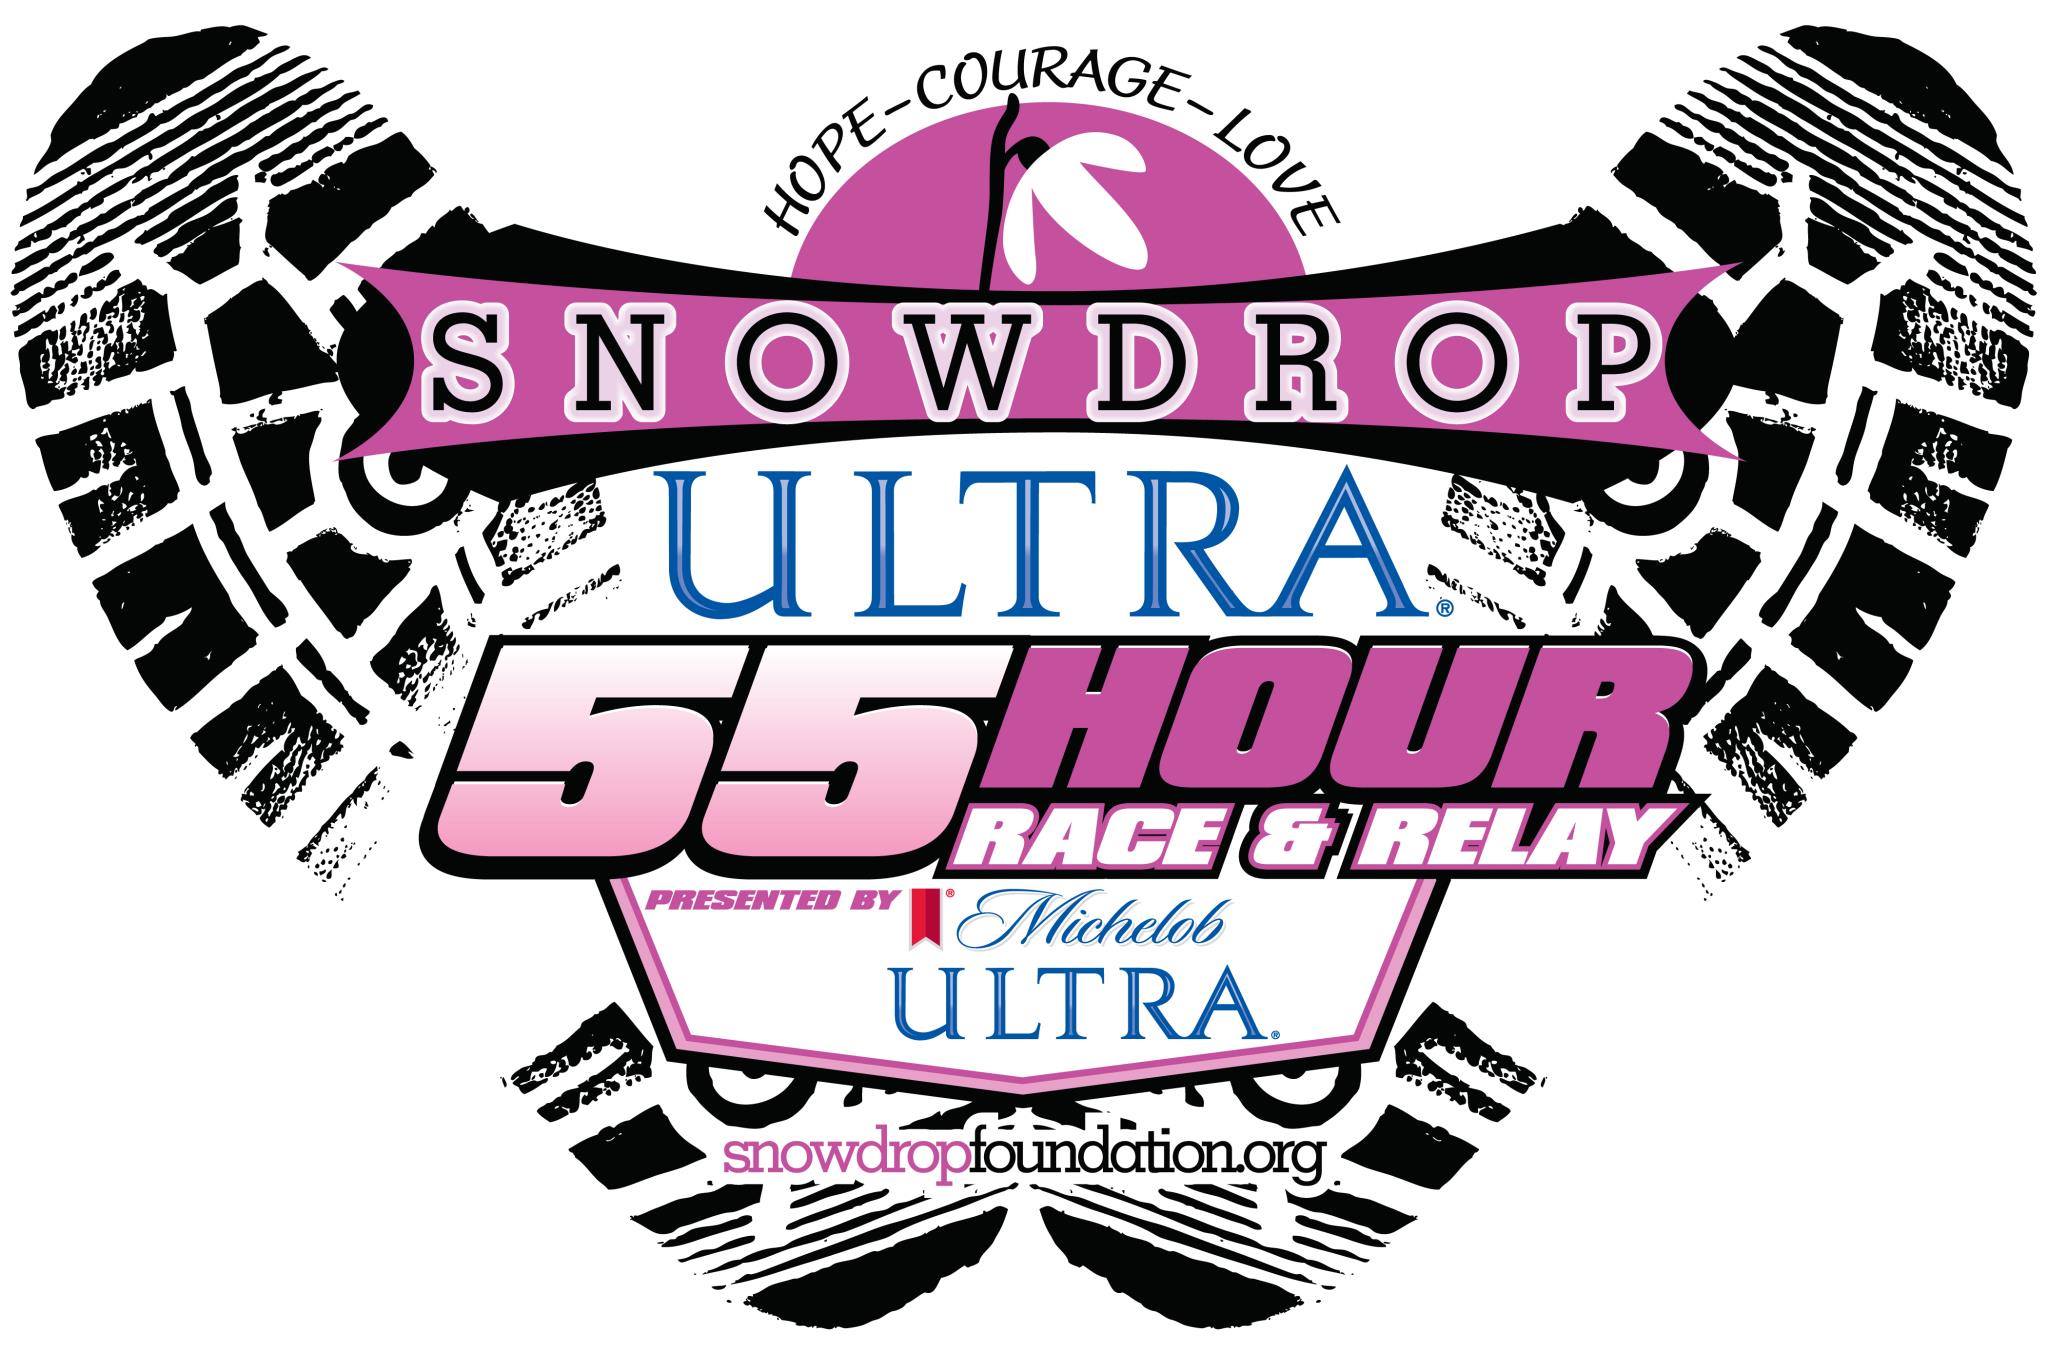 Snowdrop ULTRA 55 Hour Race & Relay logo on RaceRaves